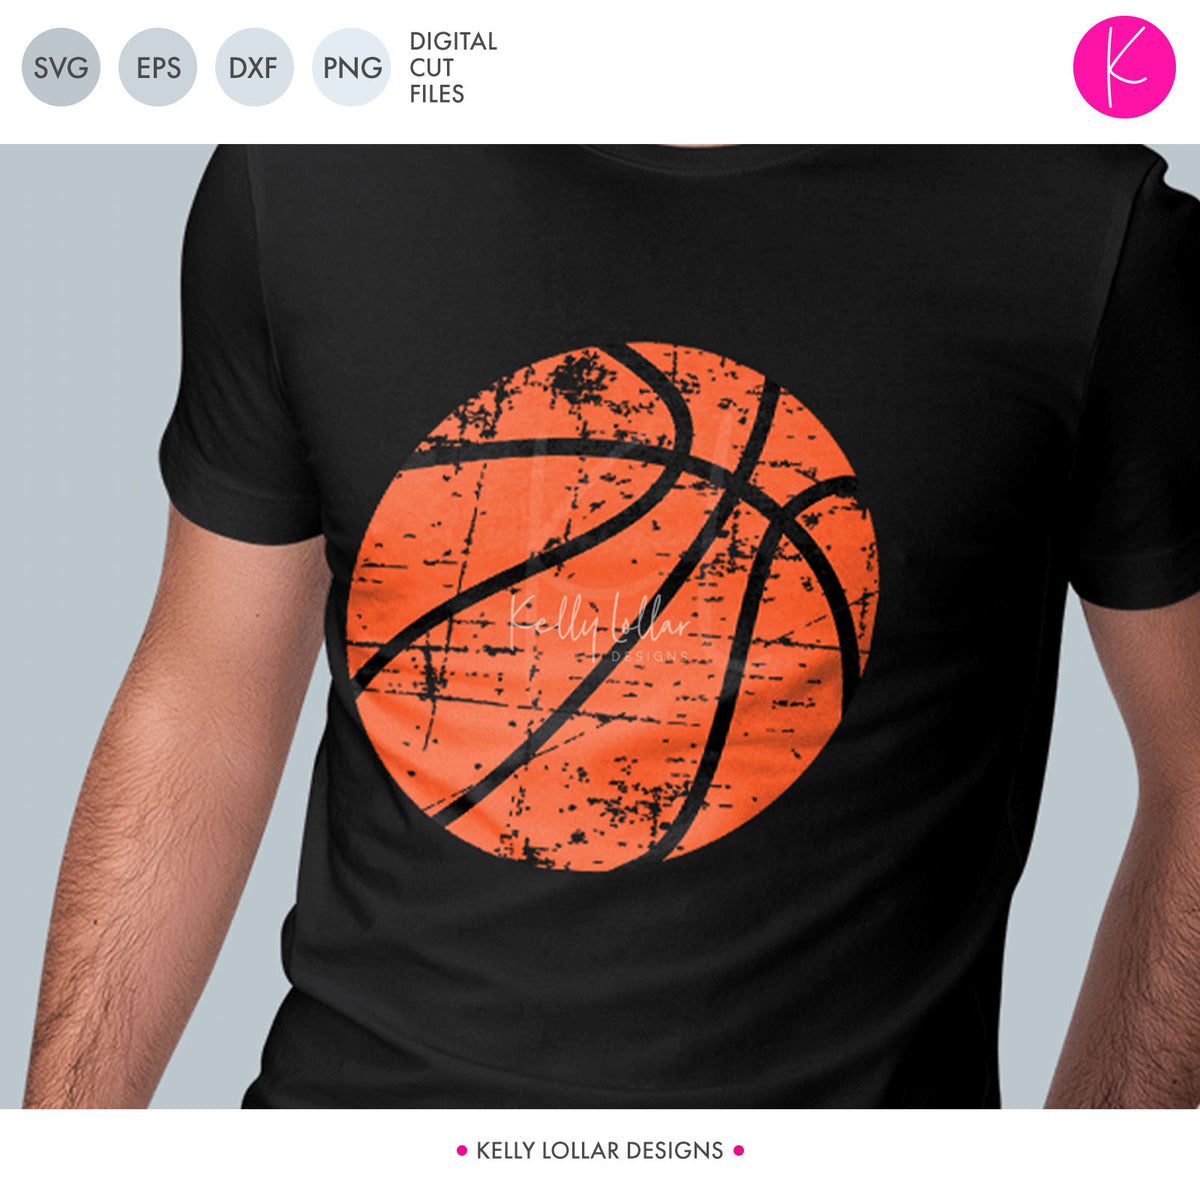 Distressed Basketball | SVG DXF EPS PNG Cut Files